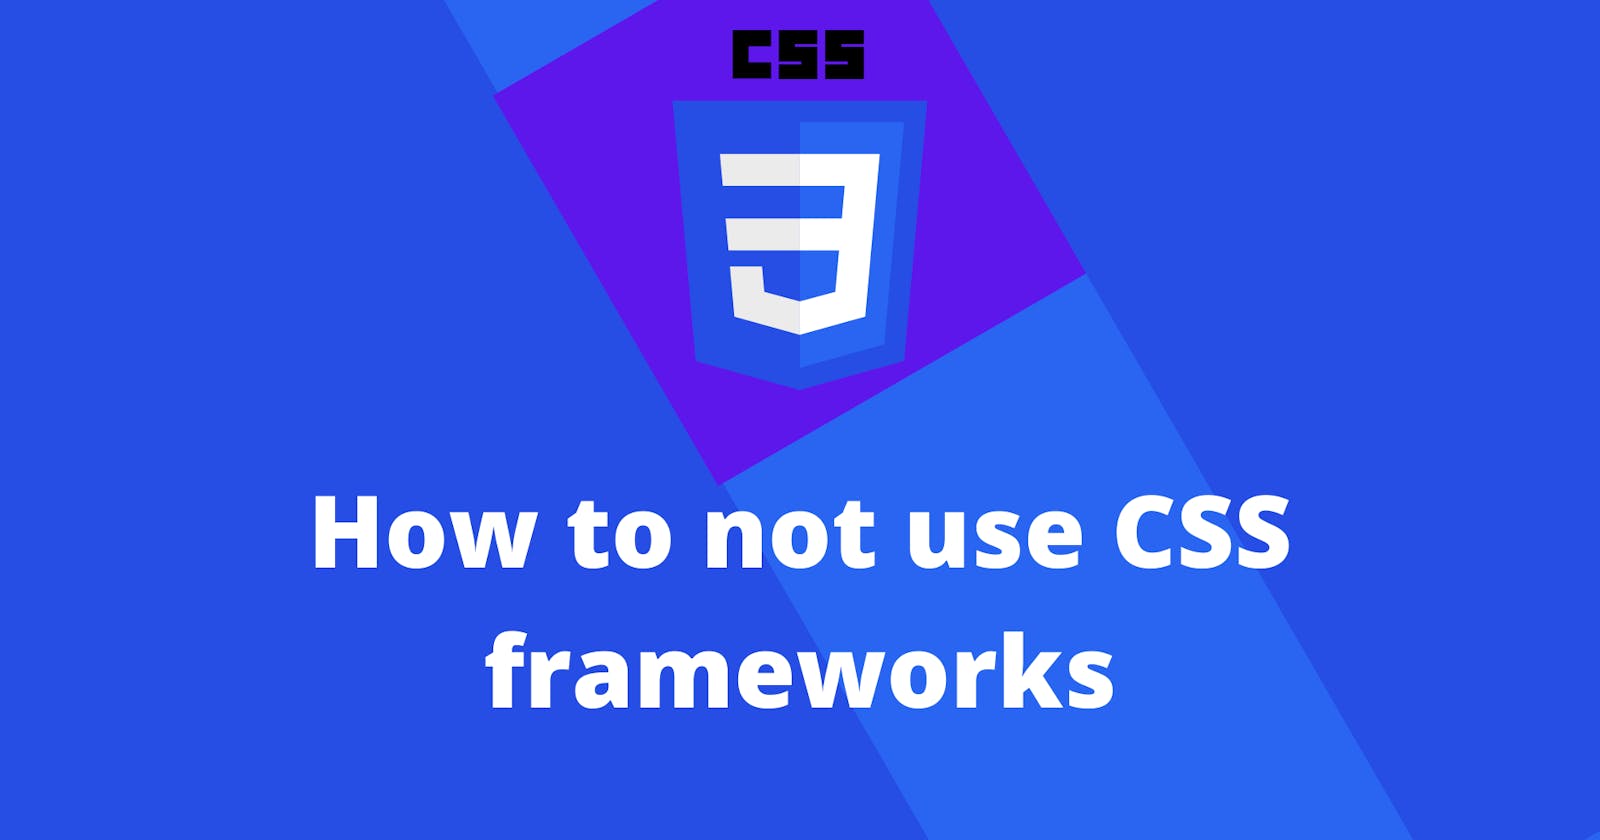 How to not use CSS frameworks - A guide to pure CSS